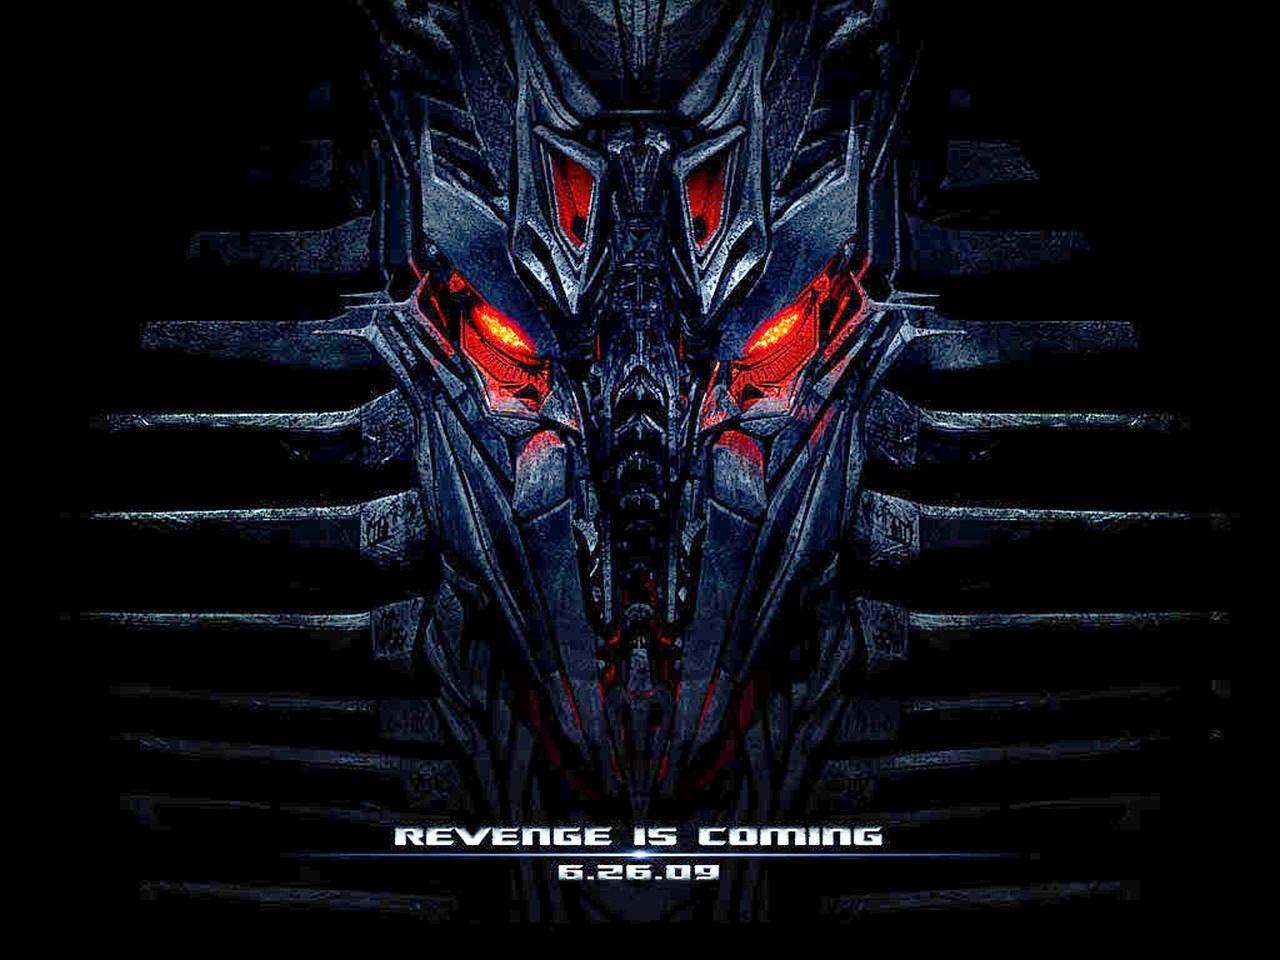 Transformers: Revenge of the Fallen for windows download free